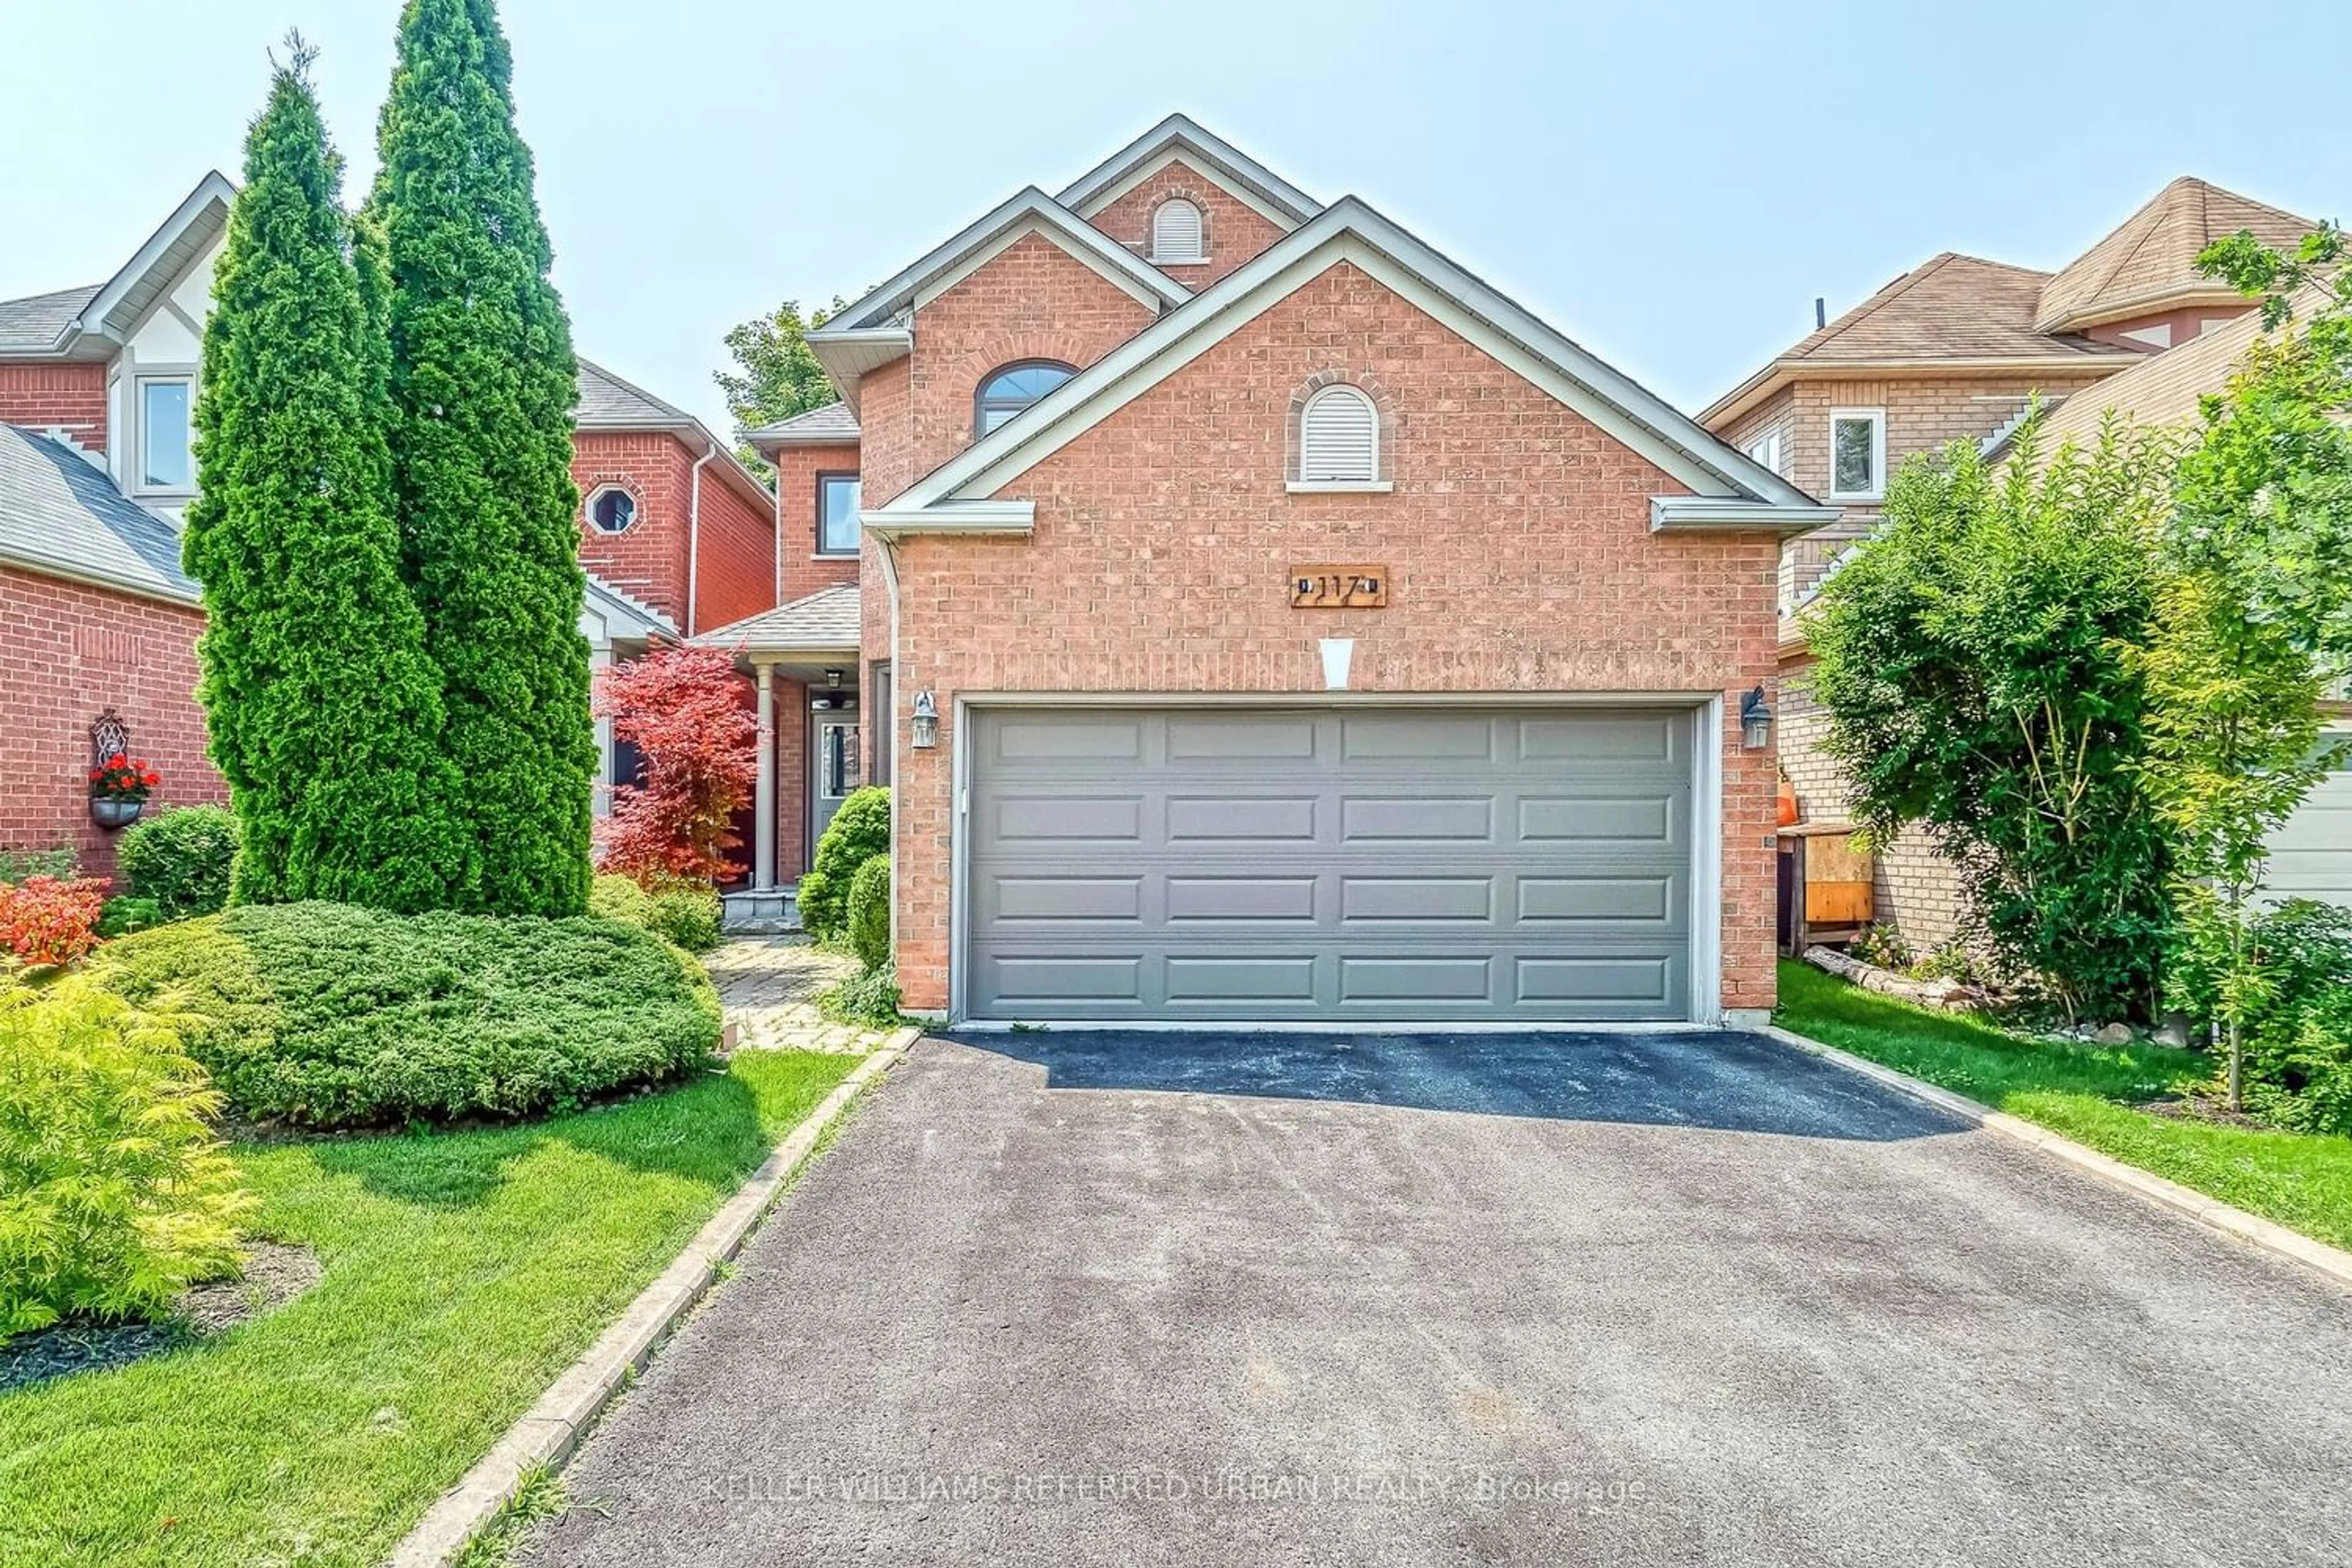 Home with brick exterior material for 117 Copley St, Pickering Ontario L1V 6V6